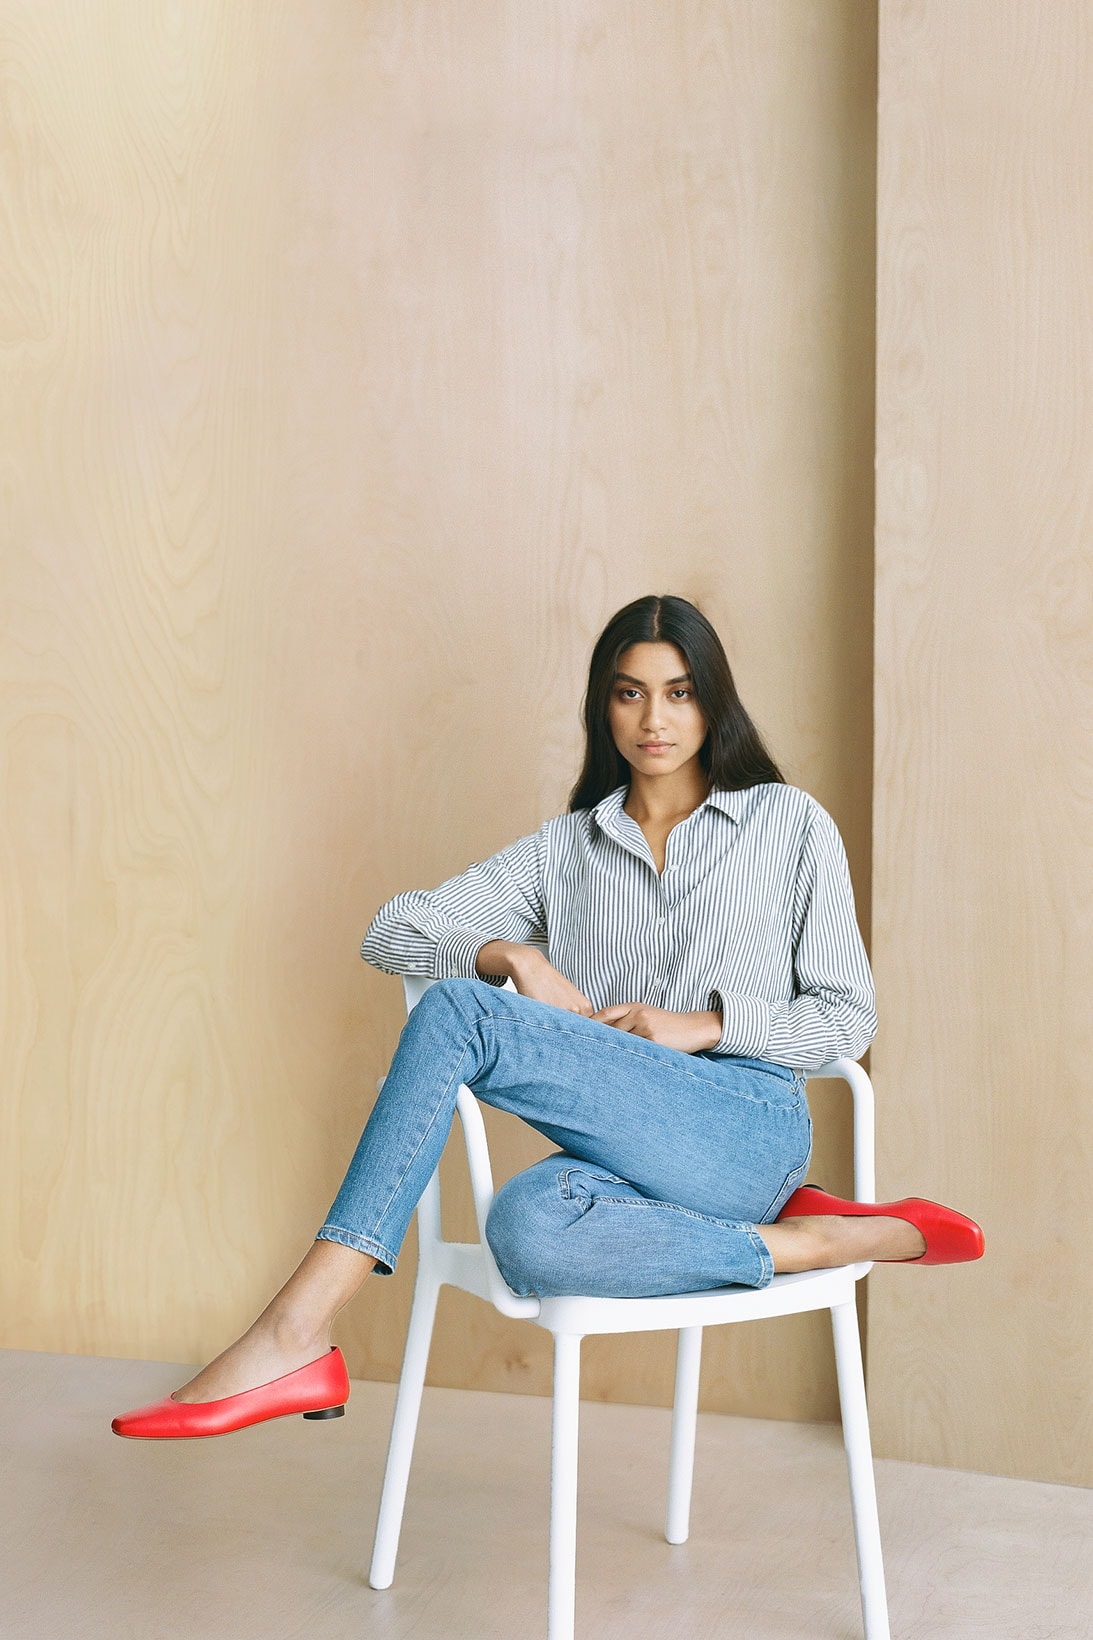 everlane pop in at nordstrom sustainability silk cashmere sweaters denim jackets shirts coats outerwear shoes